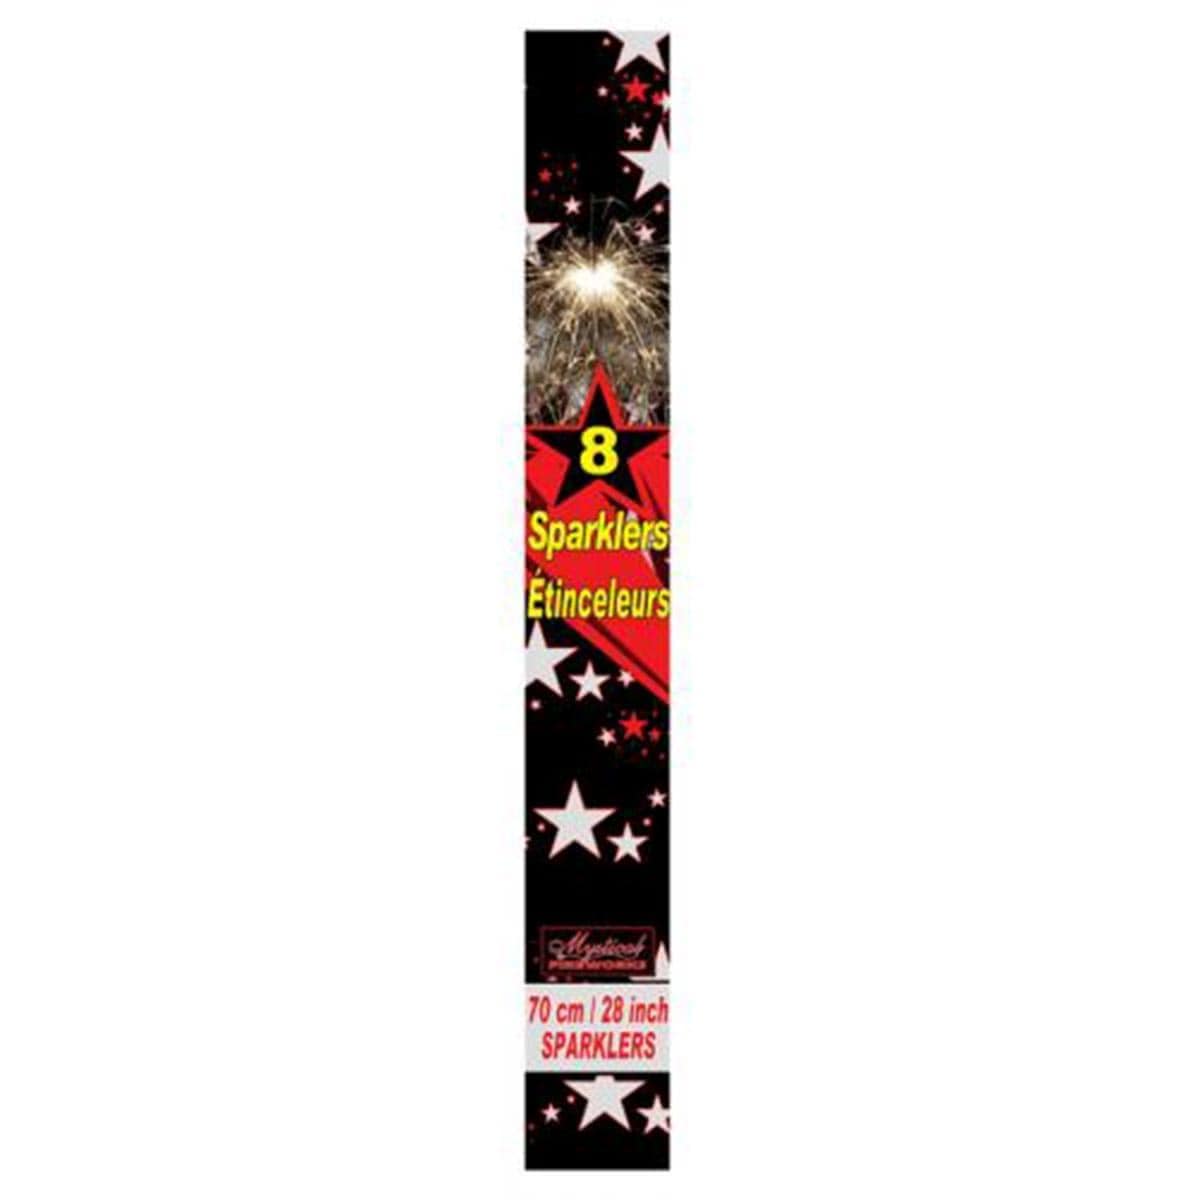 Buy Fireworks Sparklers 28 inches, 8 Count sold at Party Expert